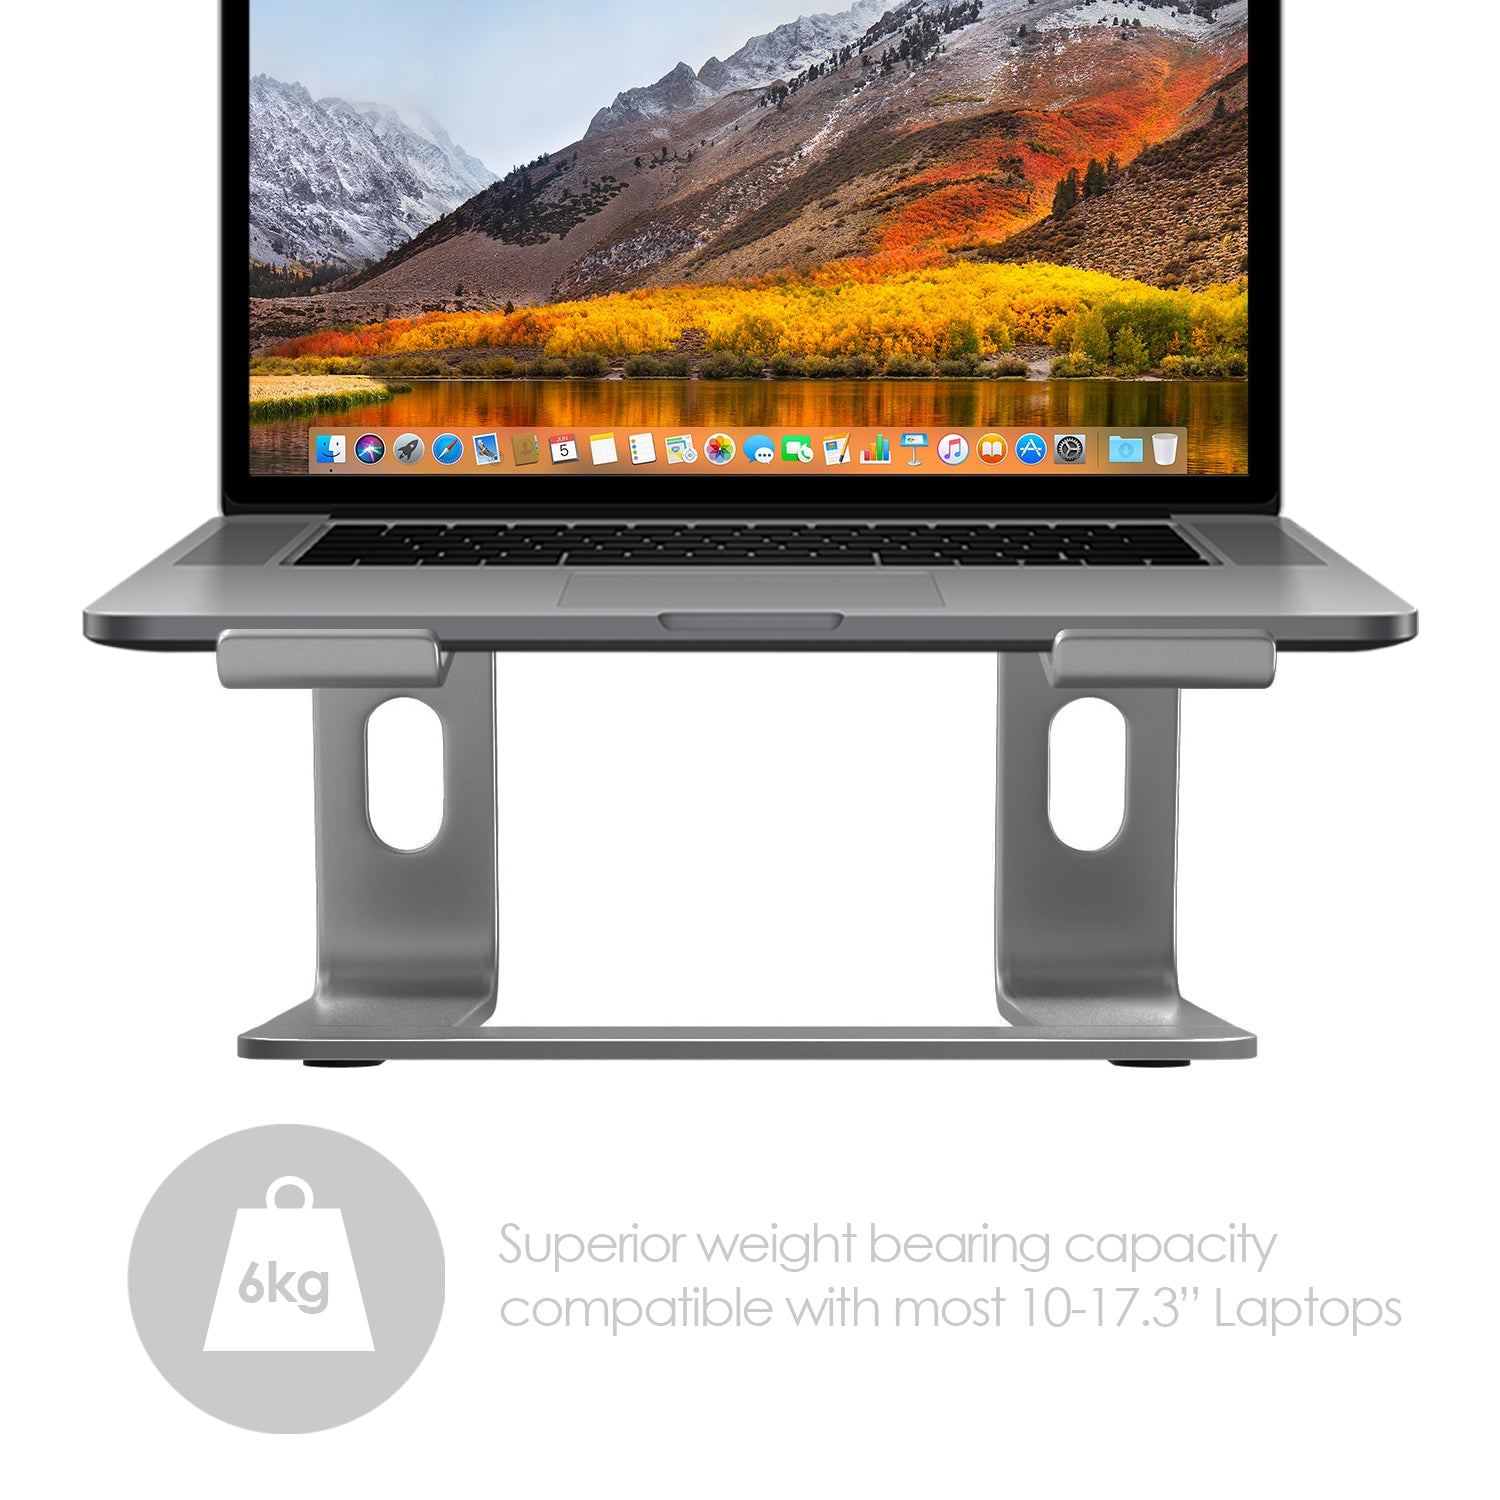 An Aluminium laptop riser stand holding An Apple macbook pro .  Icon shows a weight with "6 kg".  Text reads "superior weight  bearing capacity compatible with most ten to seventeen inch laptops"  